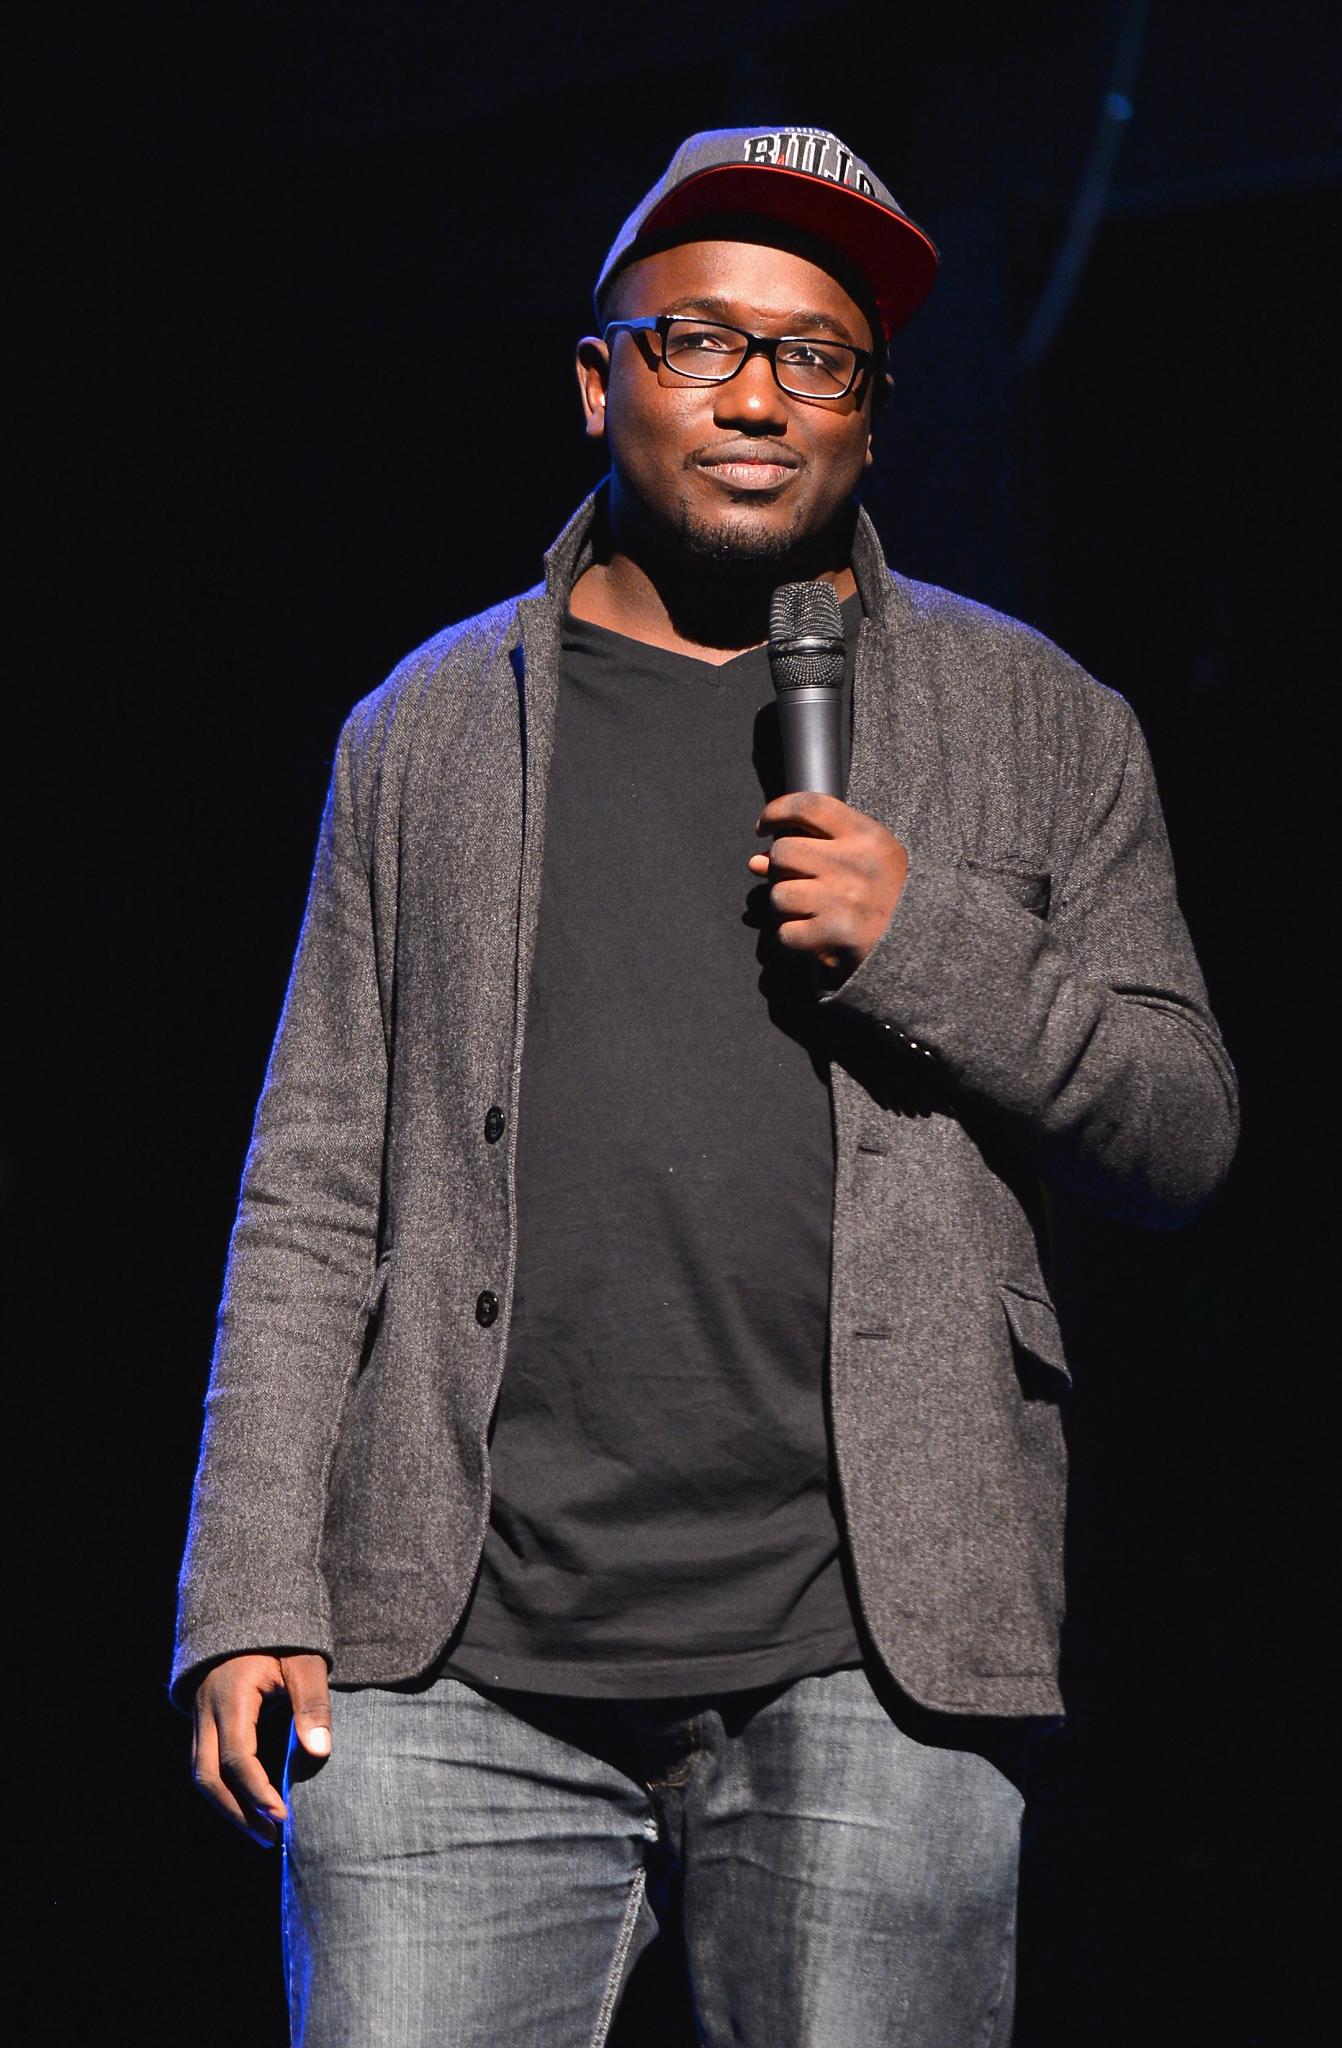 Comedian Hannibal Buress Arrested For Disorderly Intoxication In Miami